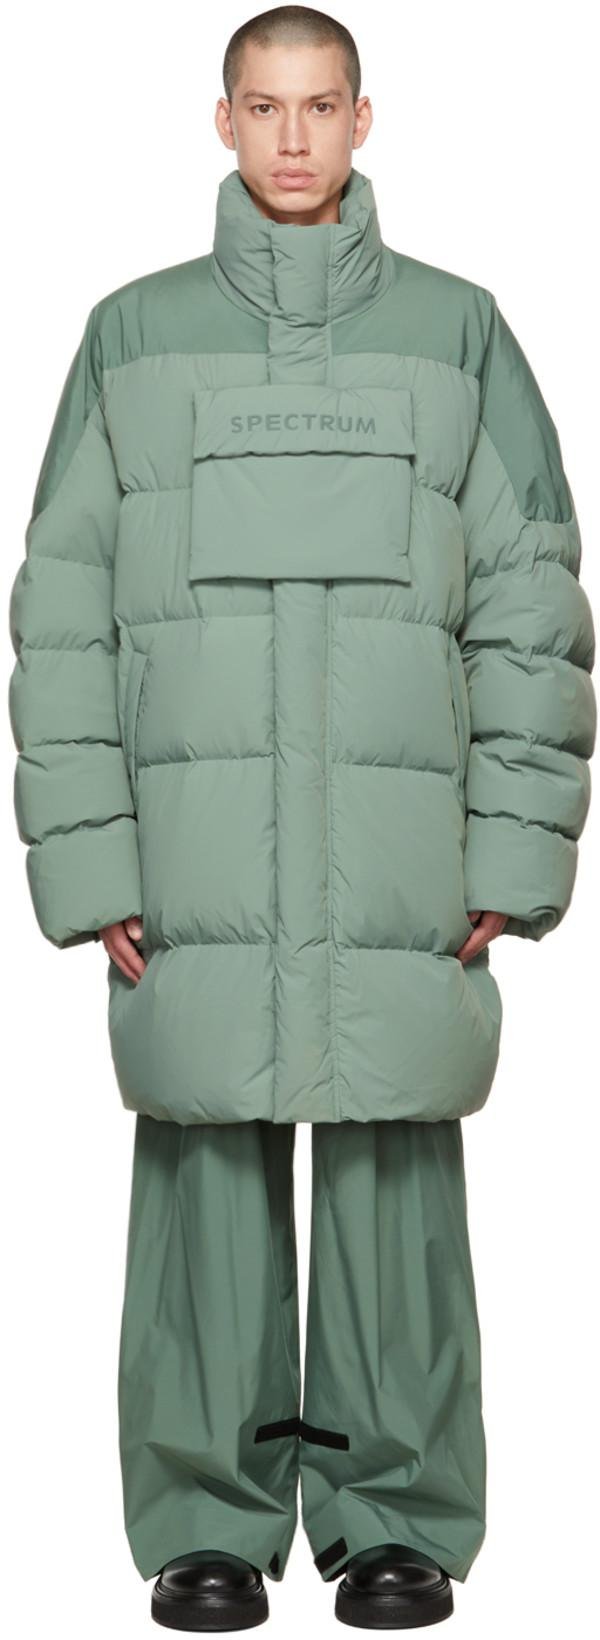 Green Vidor Down Jacket by A. A. SPECTRUM